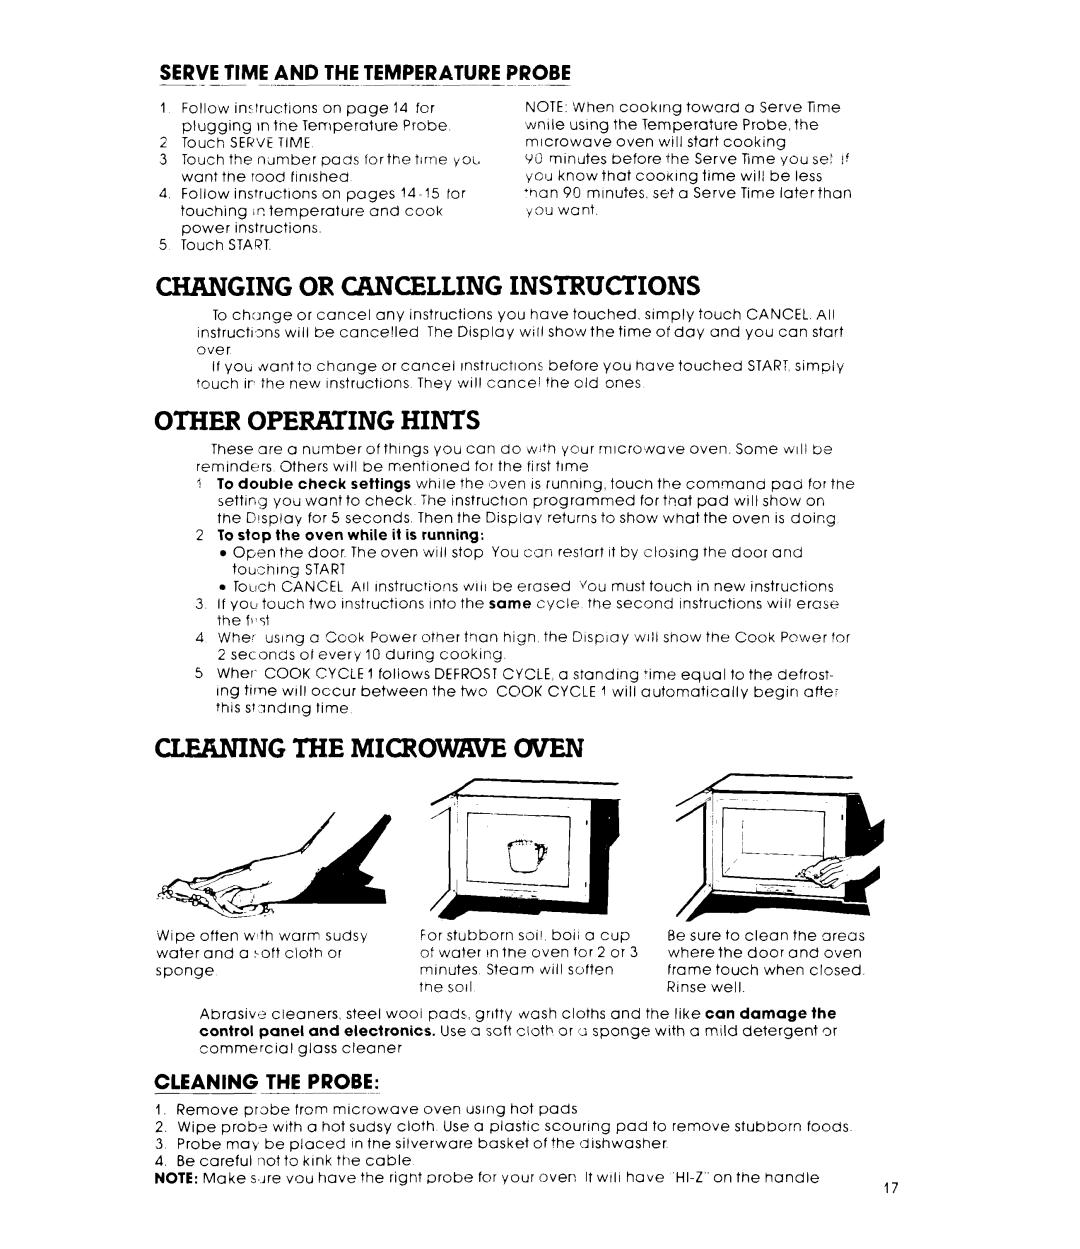 Whirlpool MW87OOXL manual Changing Or Cancelling Instructions, Other Opera’Ting Hints, Clekning The Microwwe Oven 